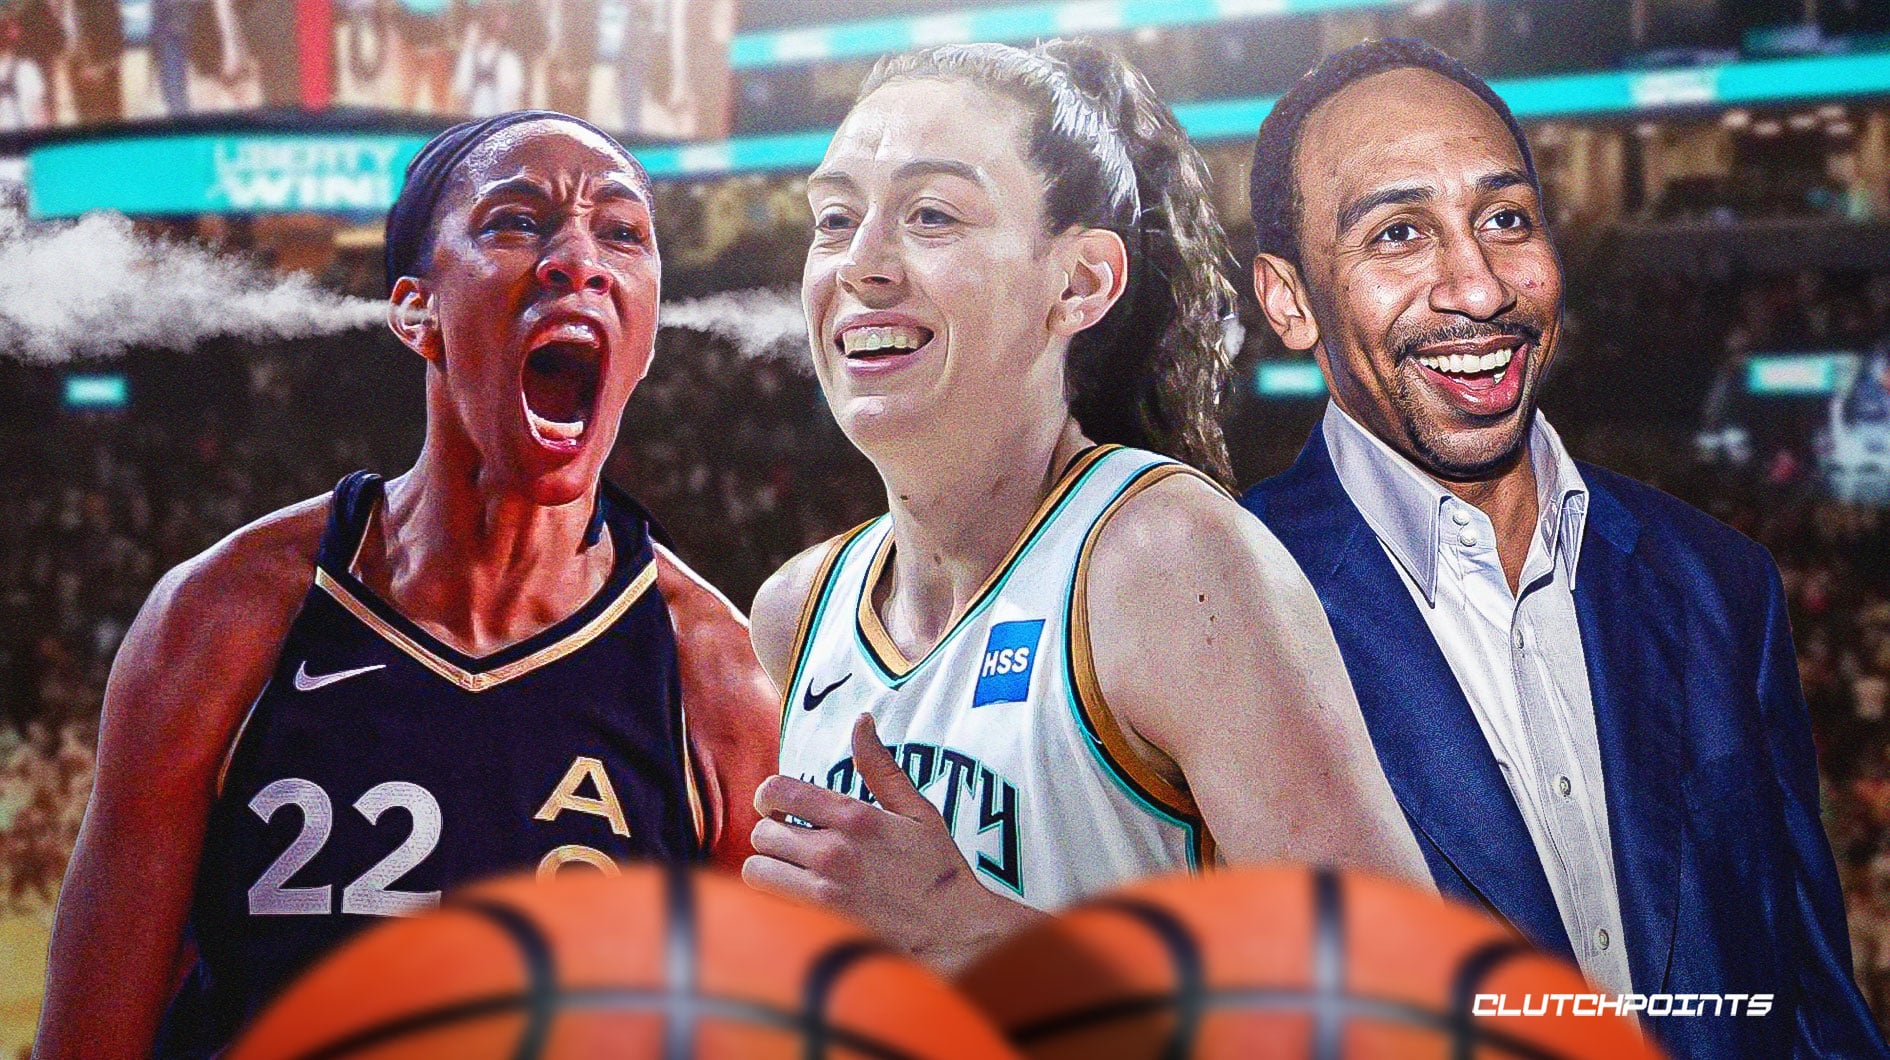 Liberty will upset Aces in WNBA Finals, Stephen A. Smith says